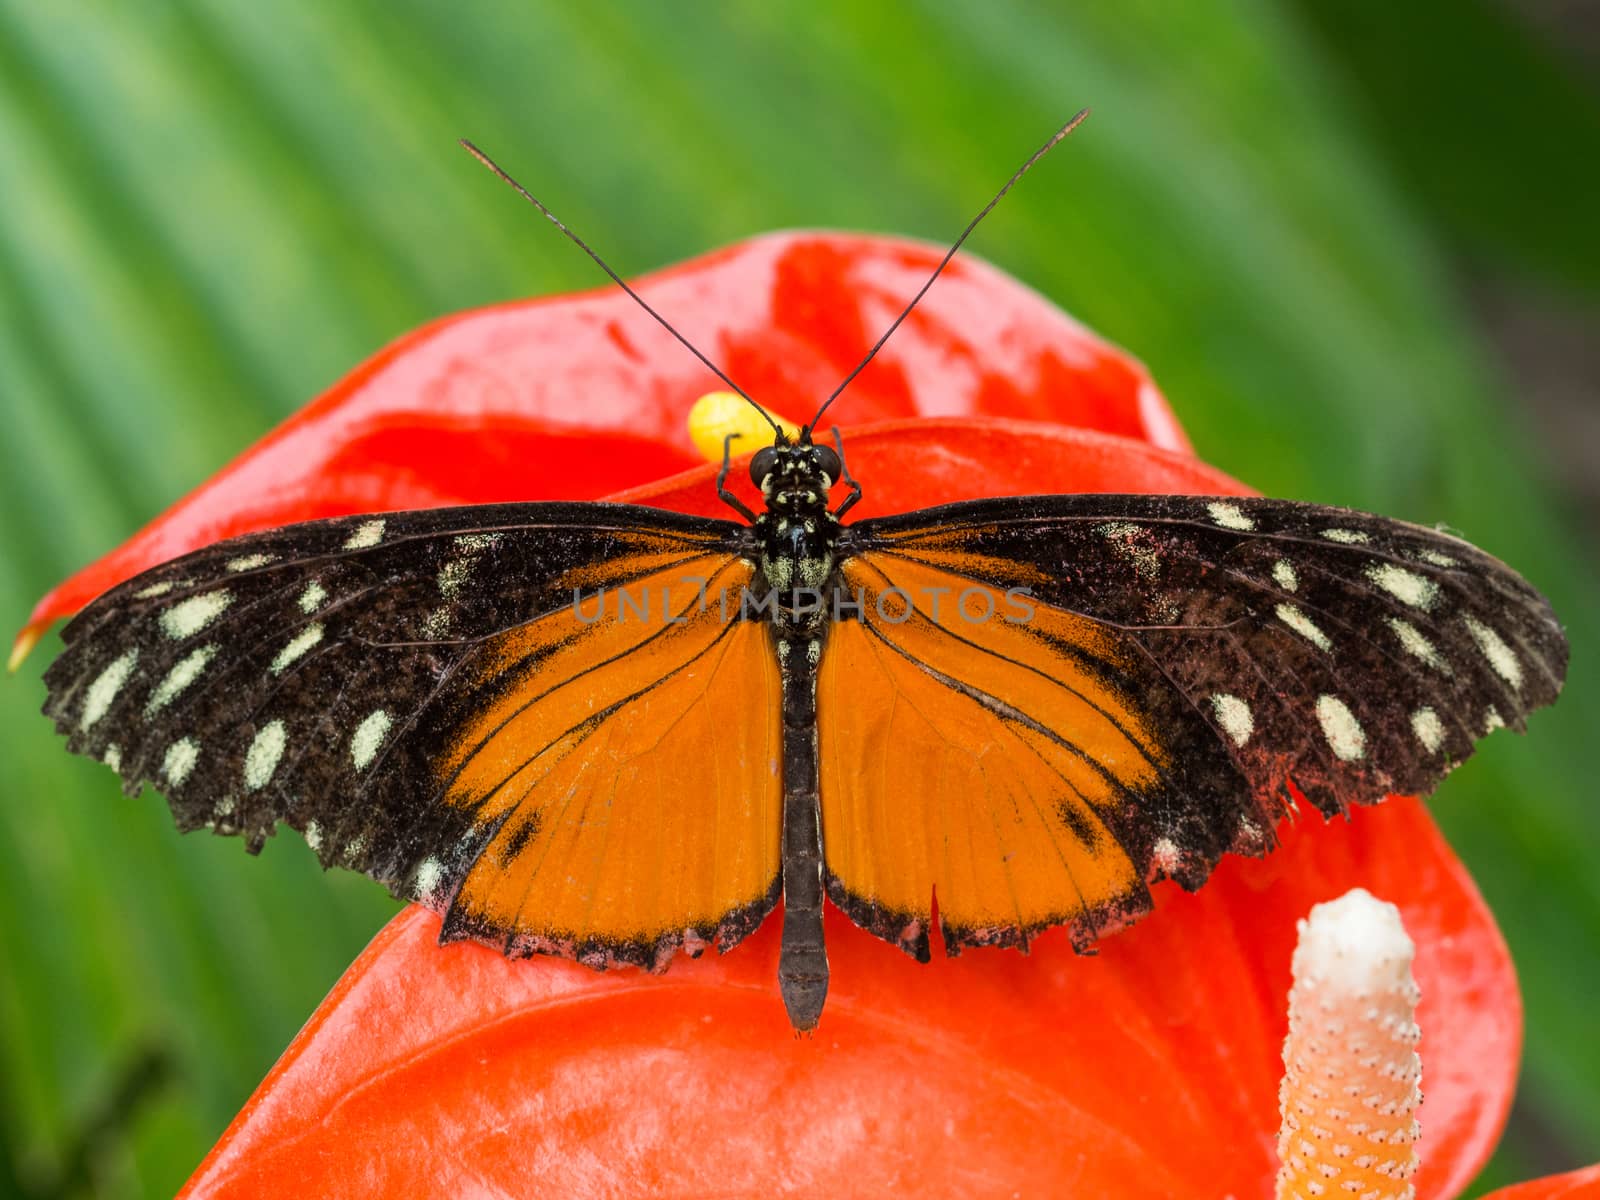 Black and orange butterfly on red orchid by frankhoekzema